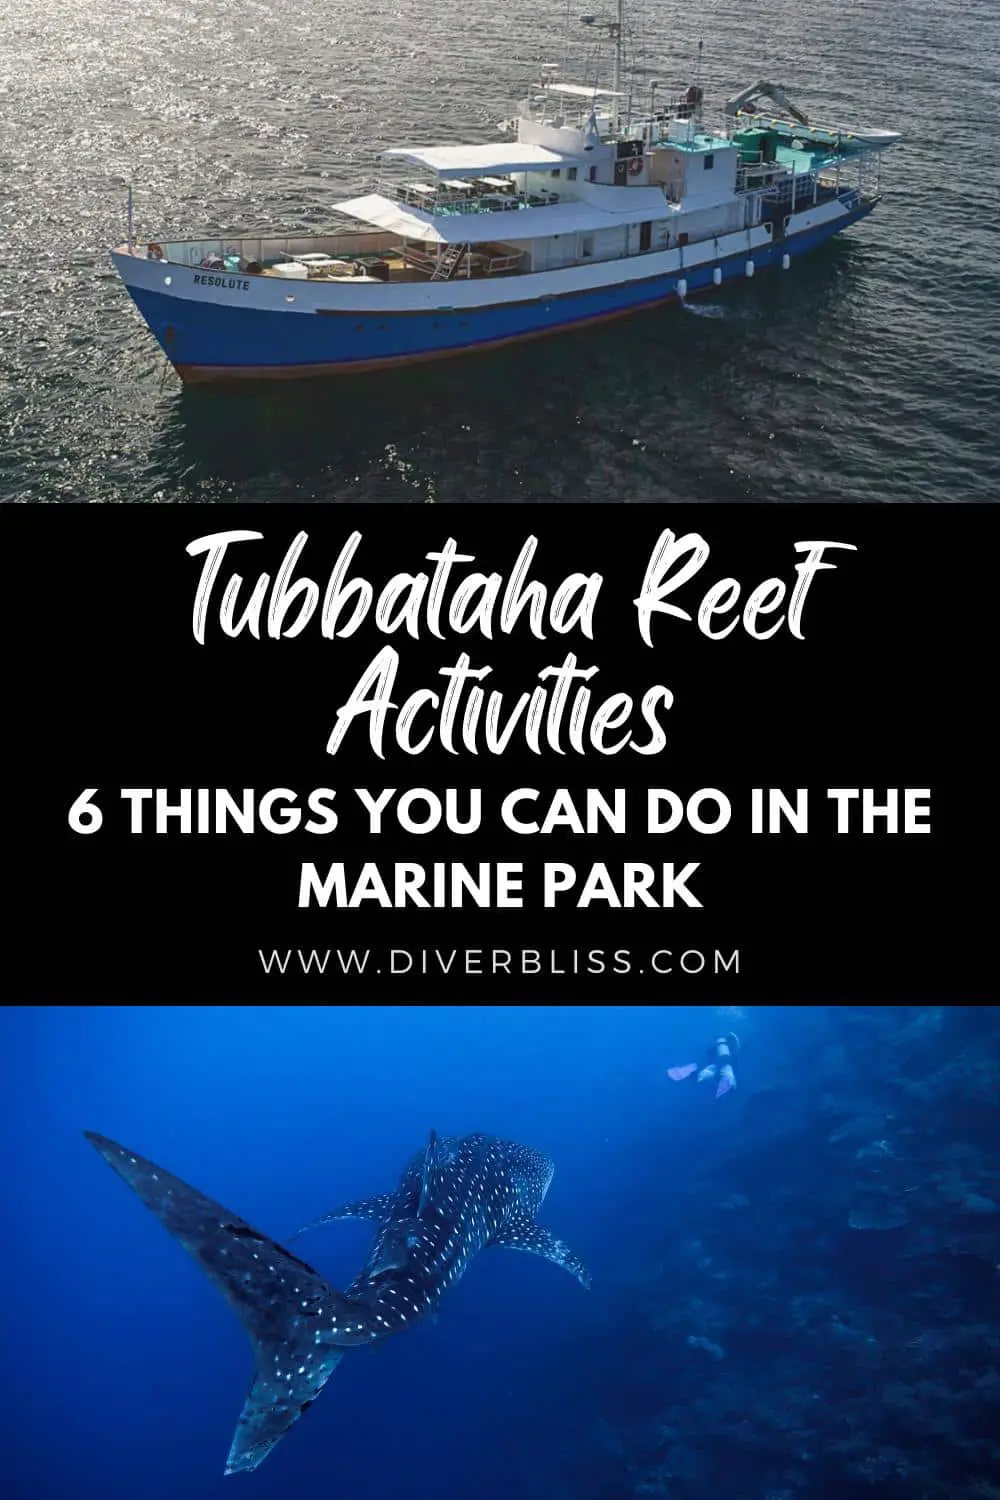 Tubbataha reef activities, 6 things you can do in the marine park